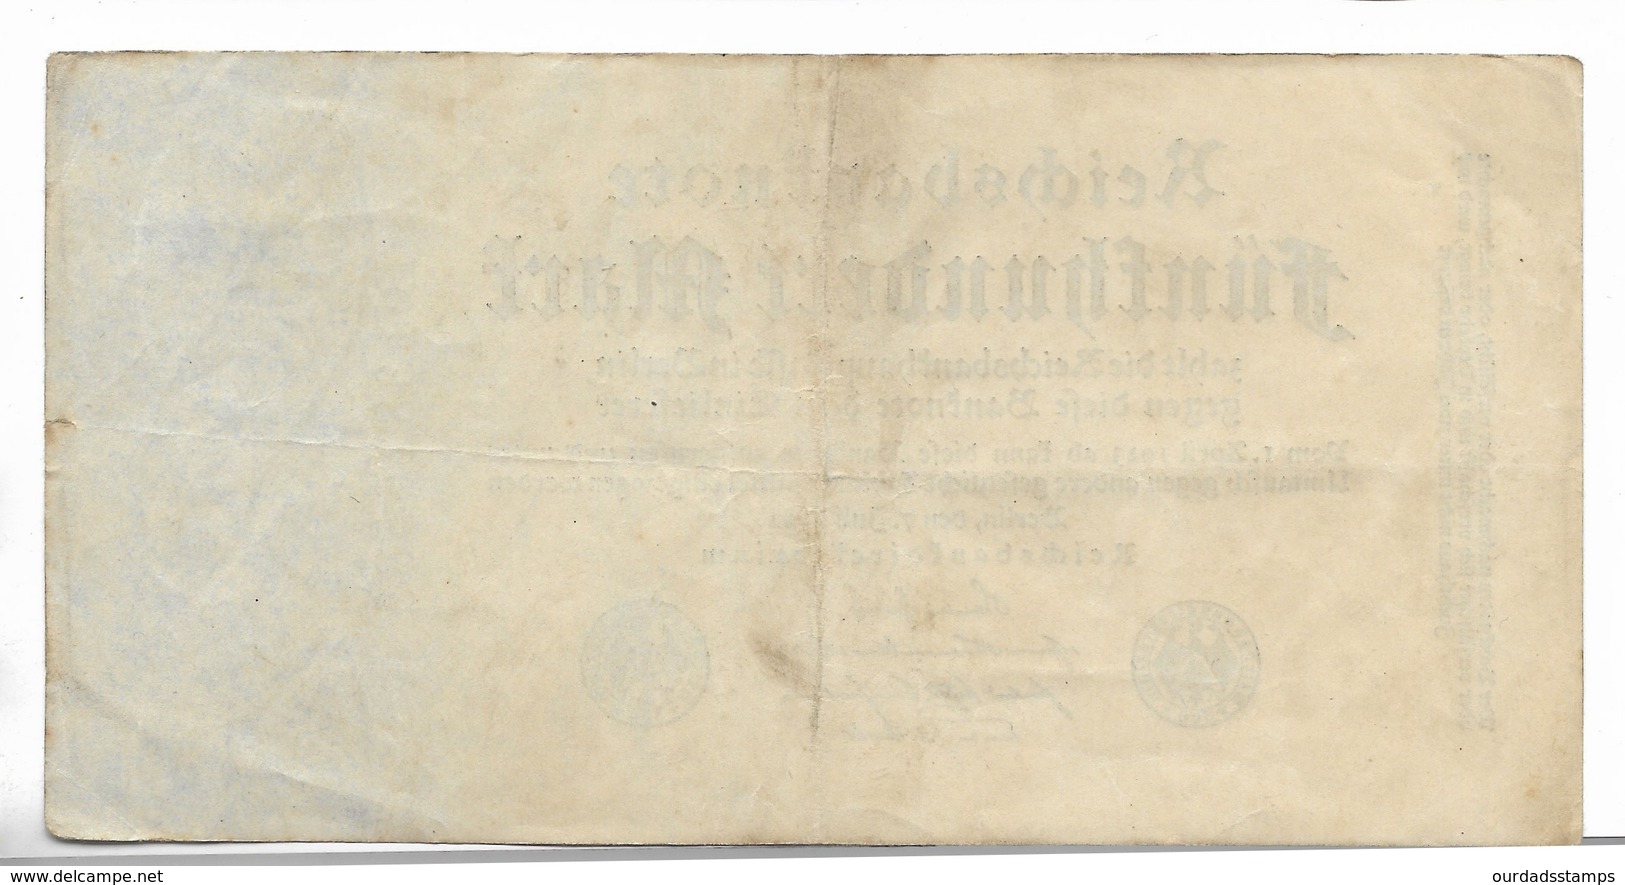 Germany, Reichsbanknote, 500 marks x 3 from 1922 (bnk003)